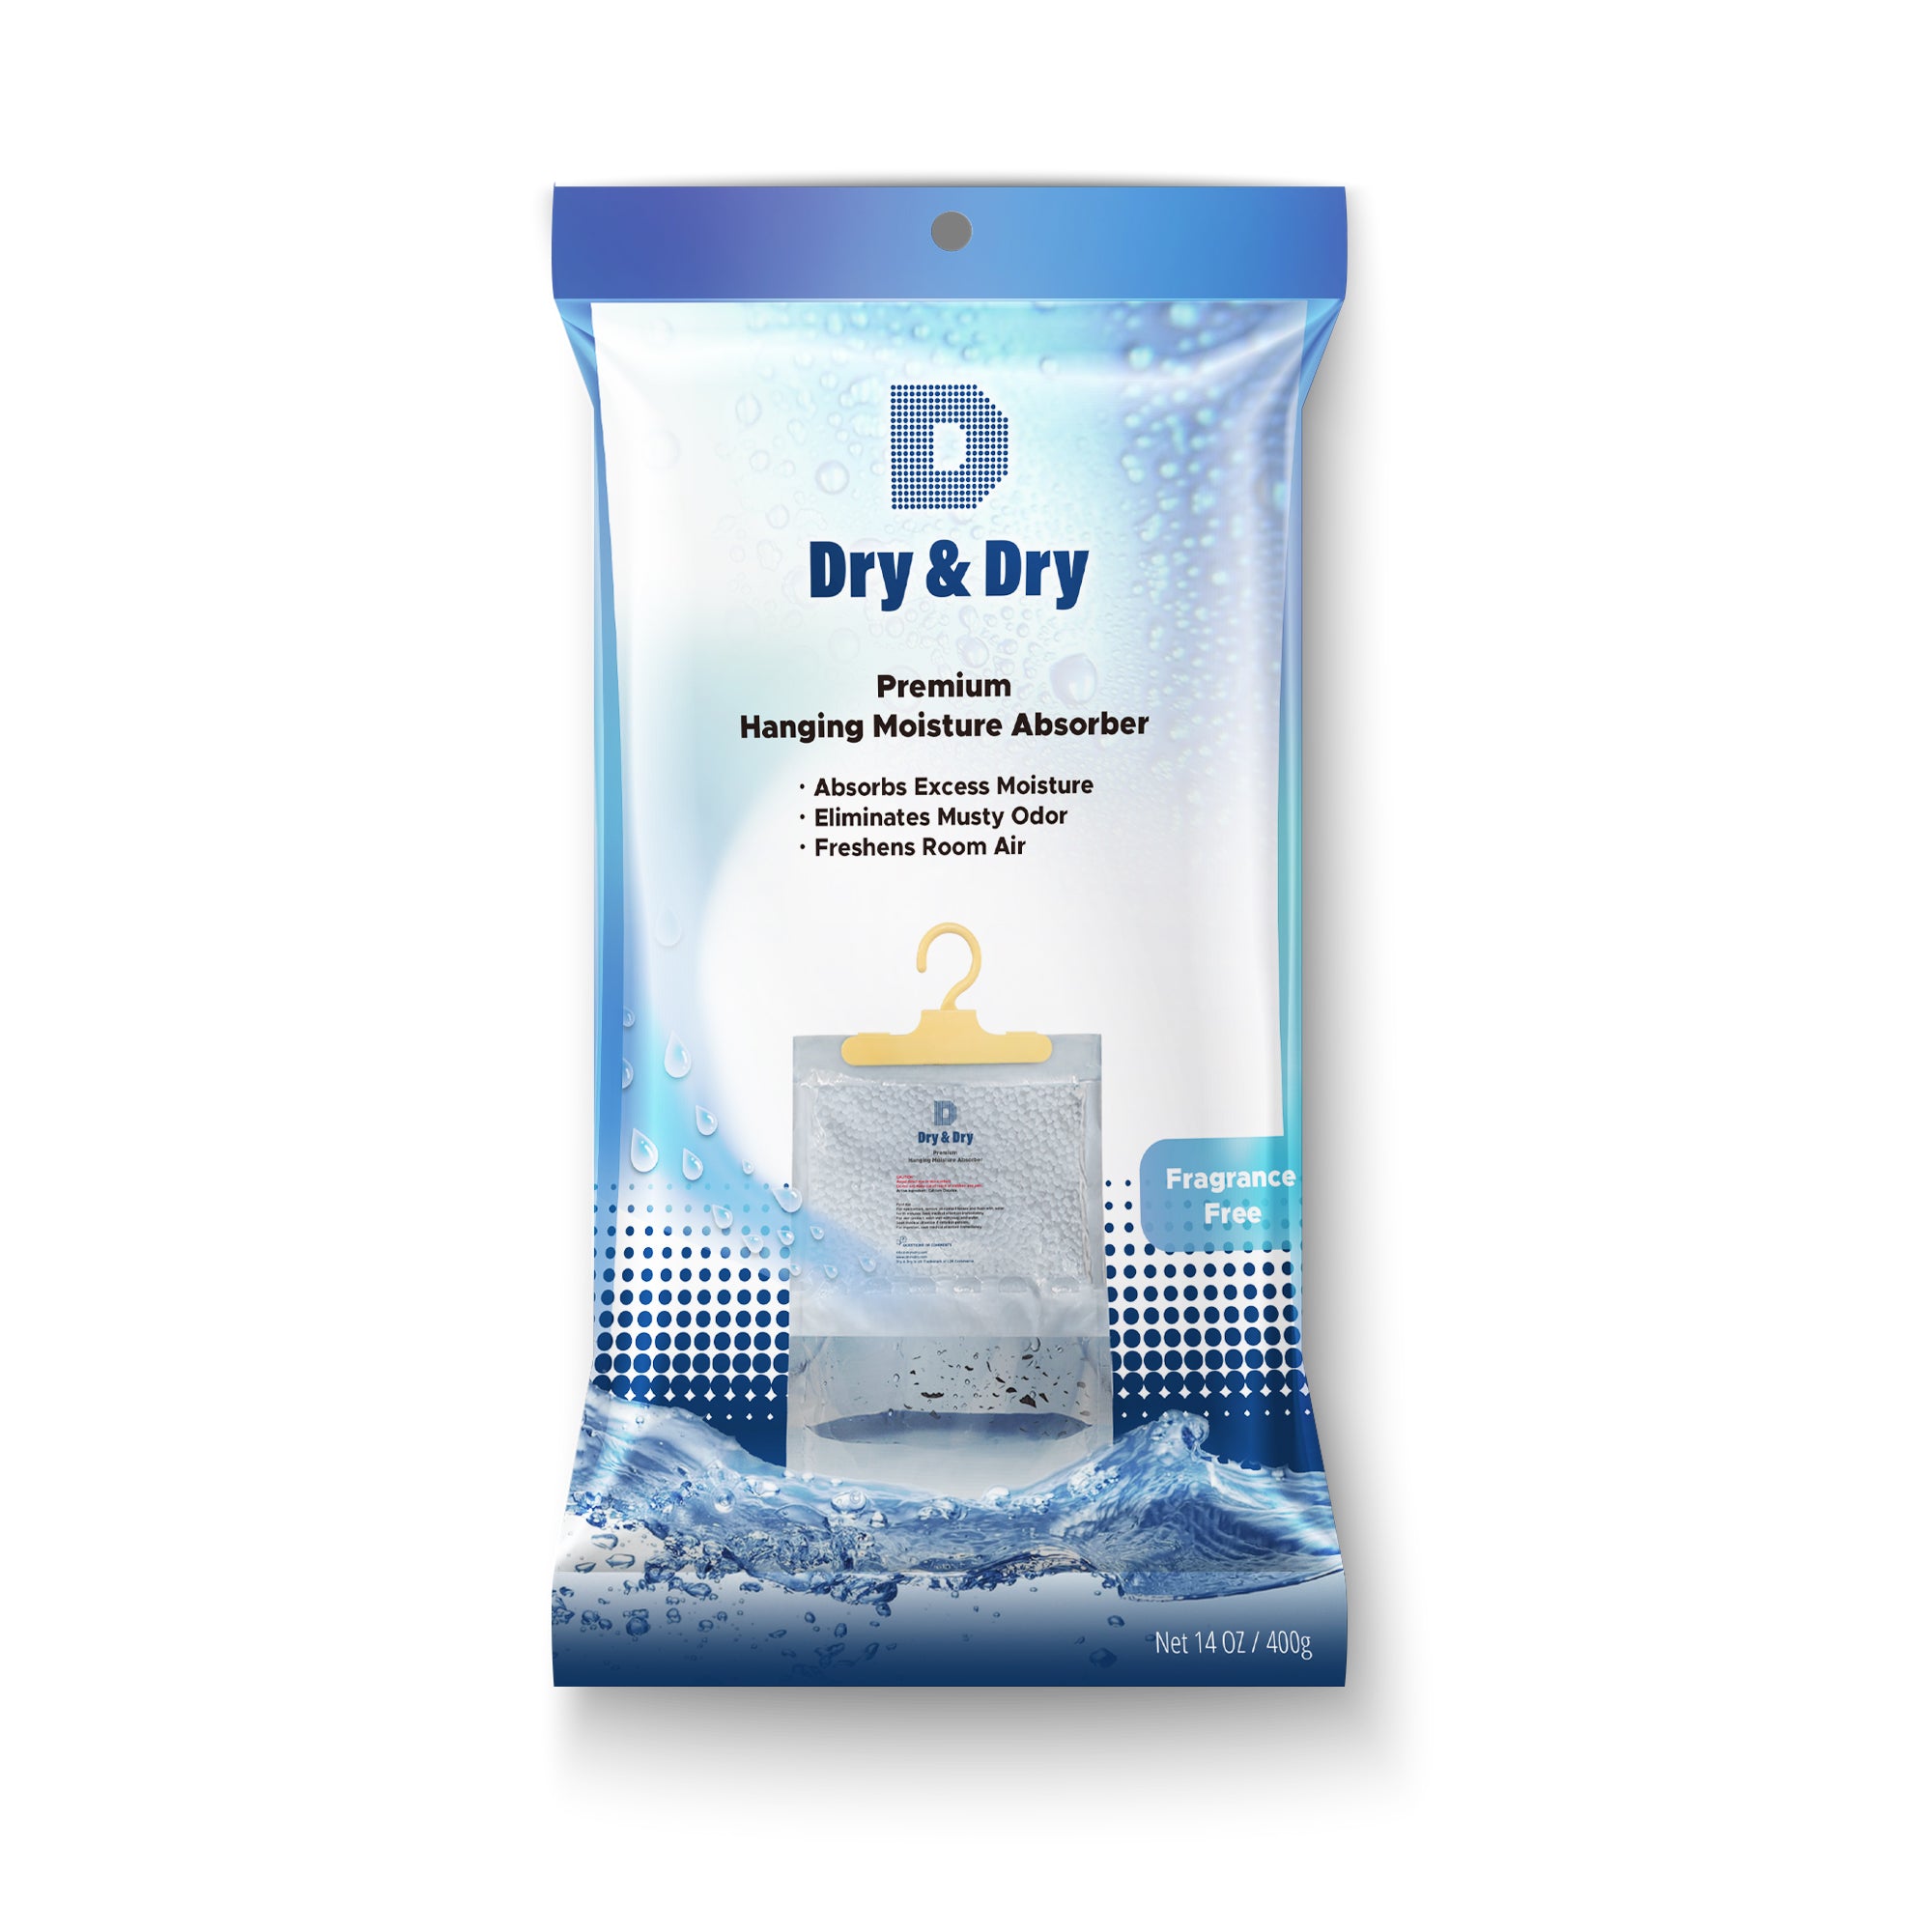 [45 pack] [Net 7 oz/Pack]  “Dry & Dry” Premium Hanging Moisture Absorber to Control Excess Moisture for Basements, Bathrooms, Laundry Rooms, and Enclosed Spaces